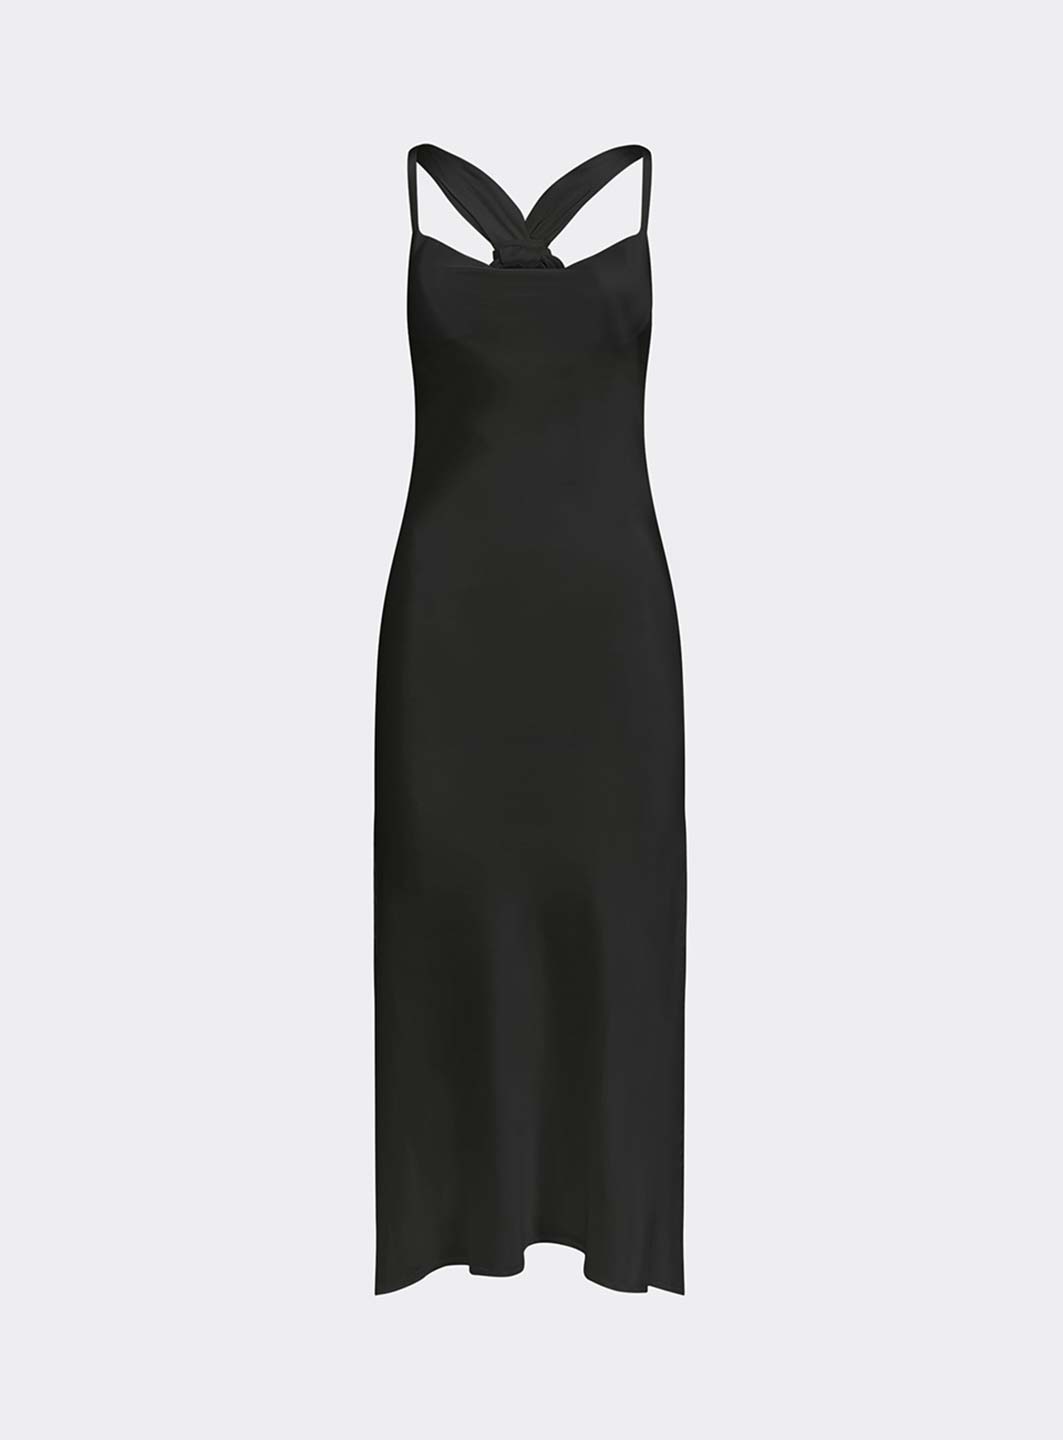 Thumbnail for Product gallery 6, Violante nessi calder dress black product